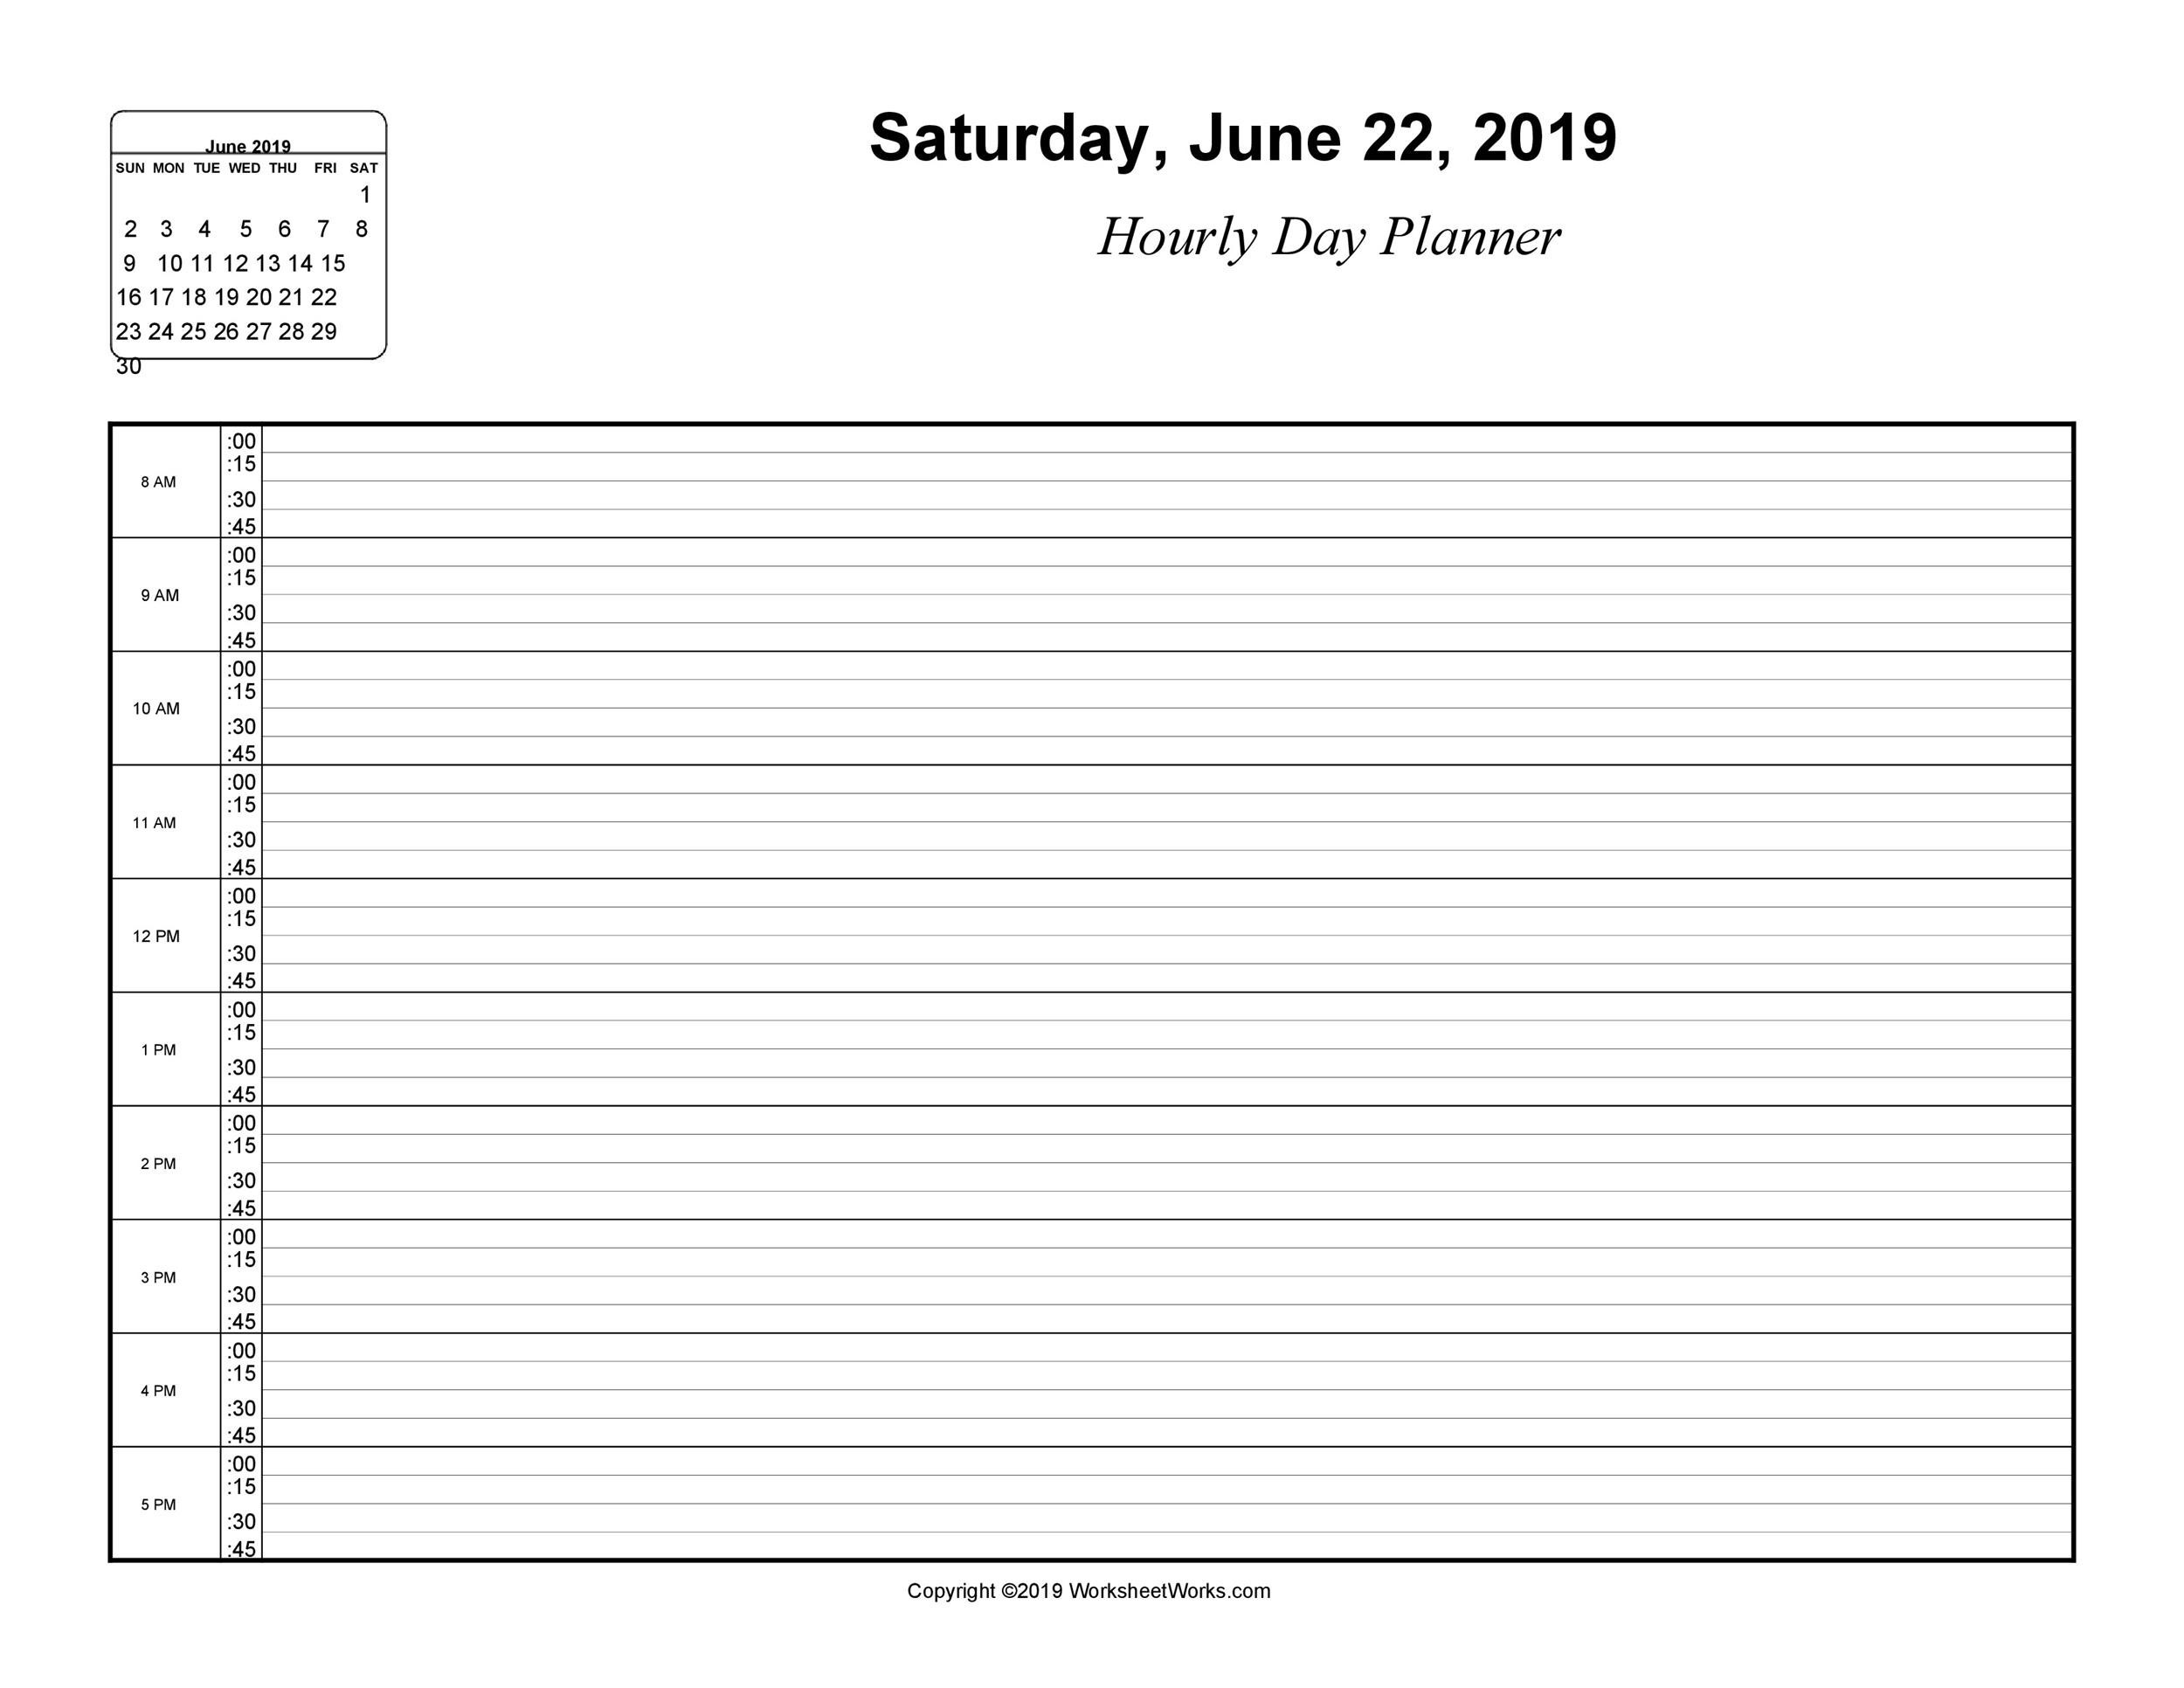 Free hourly schedule template 01